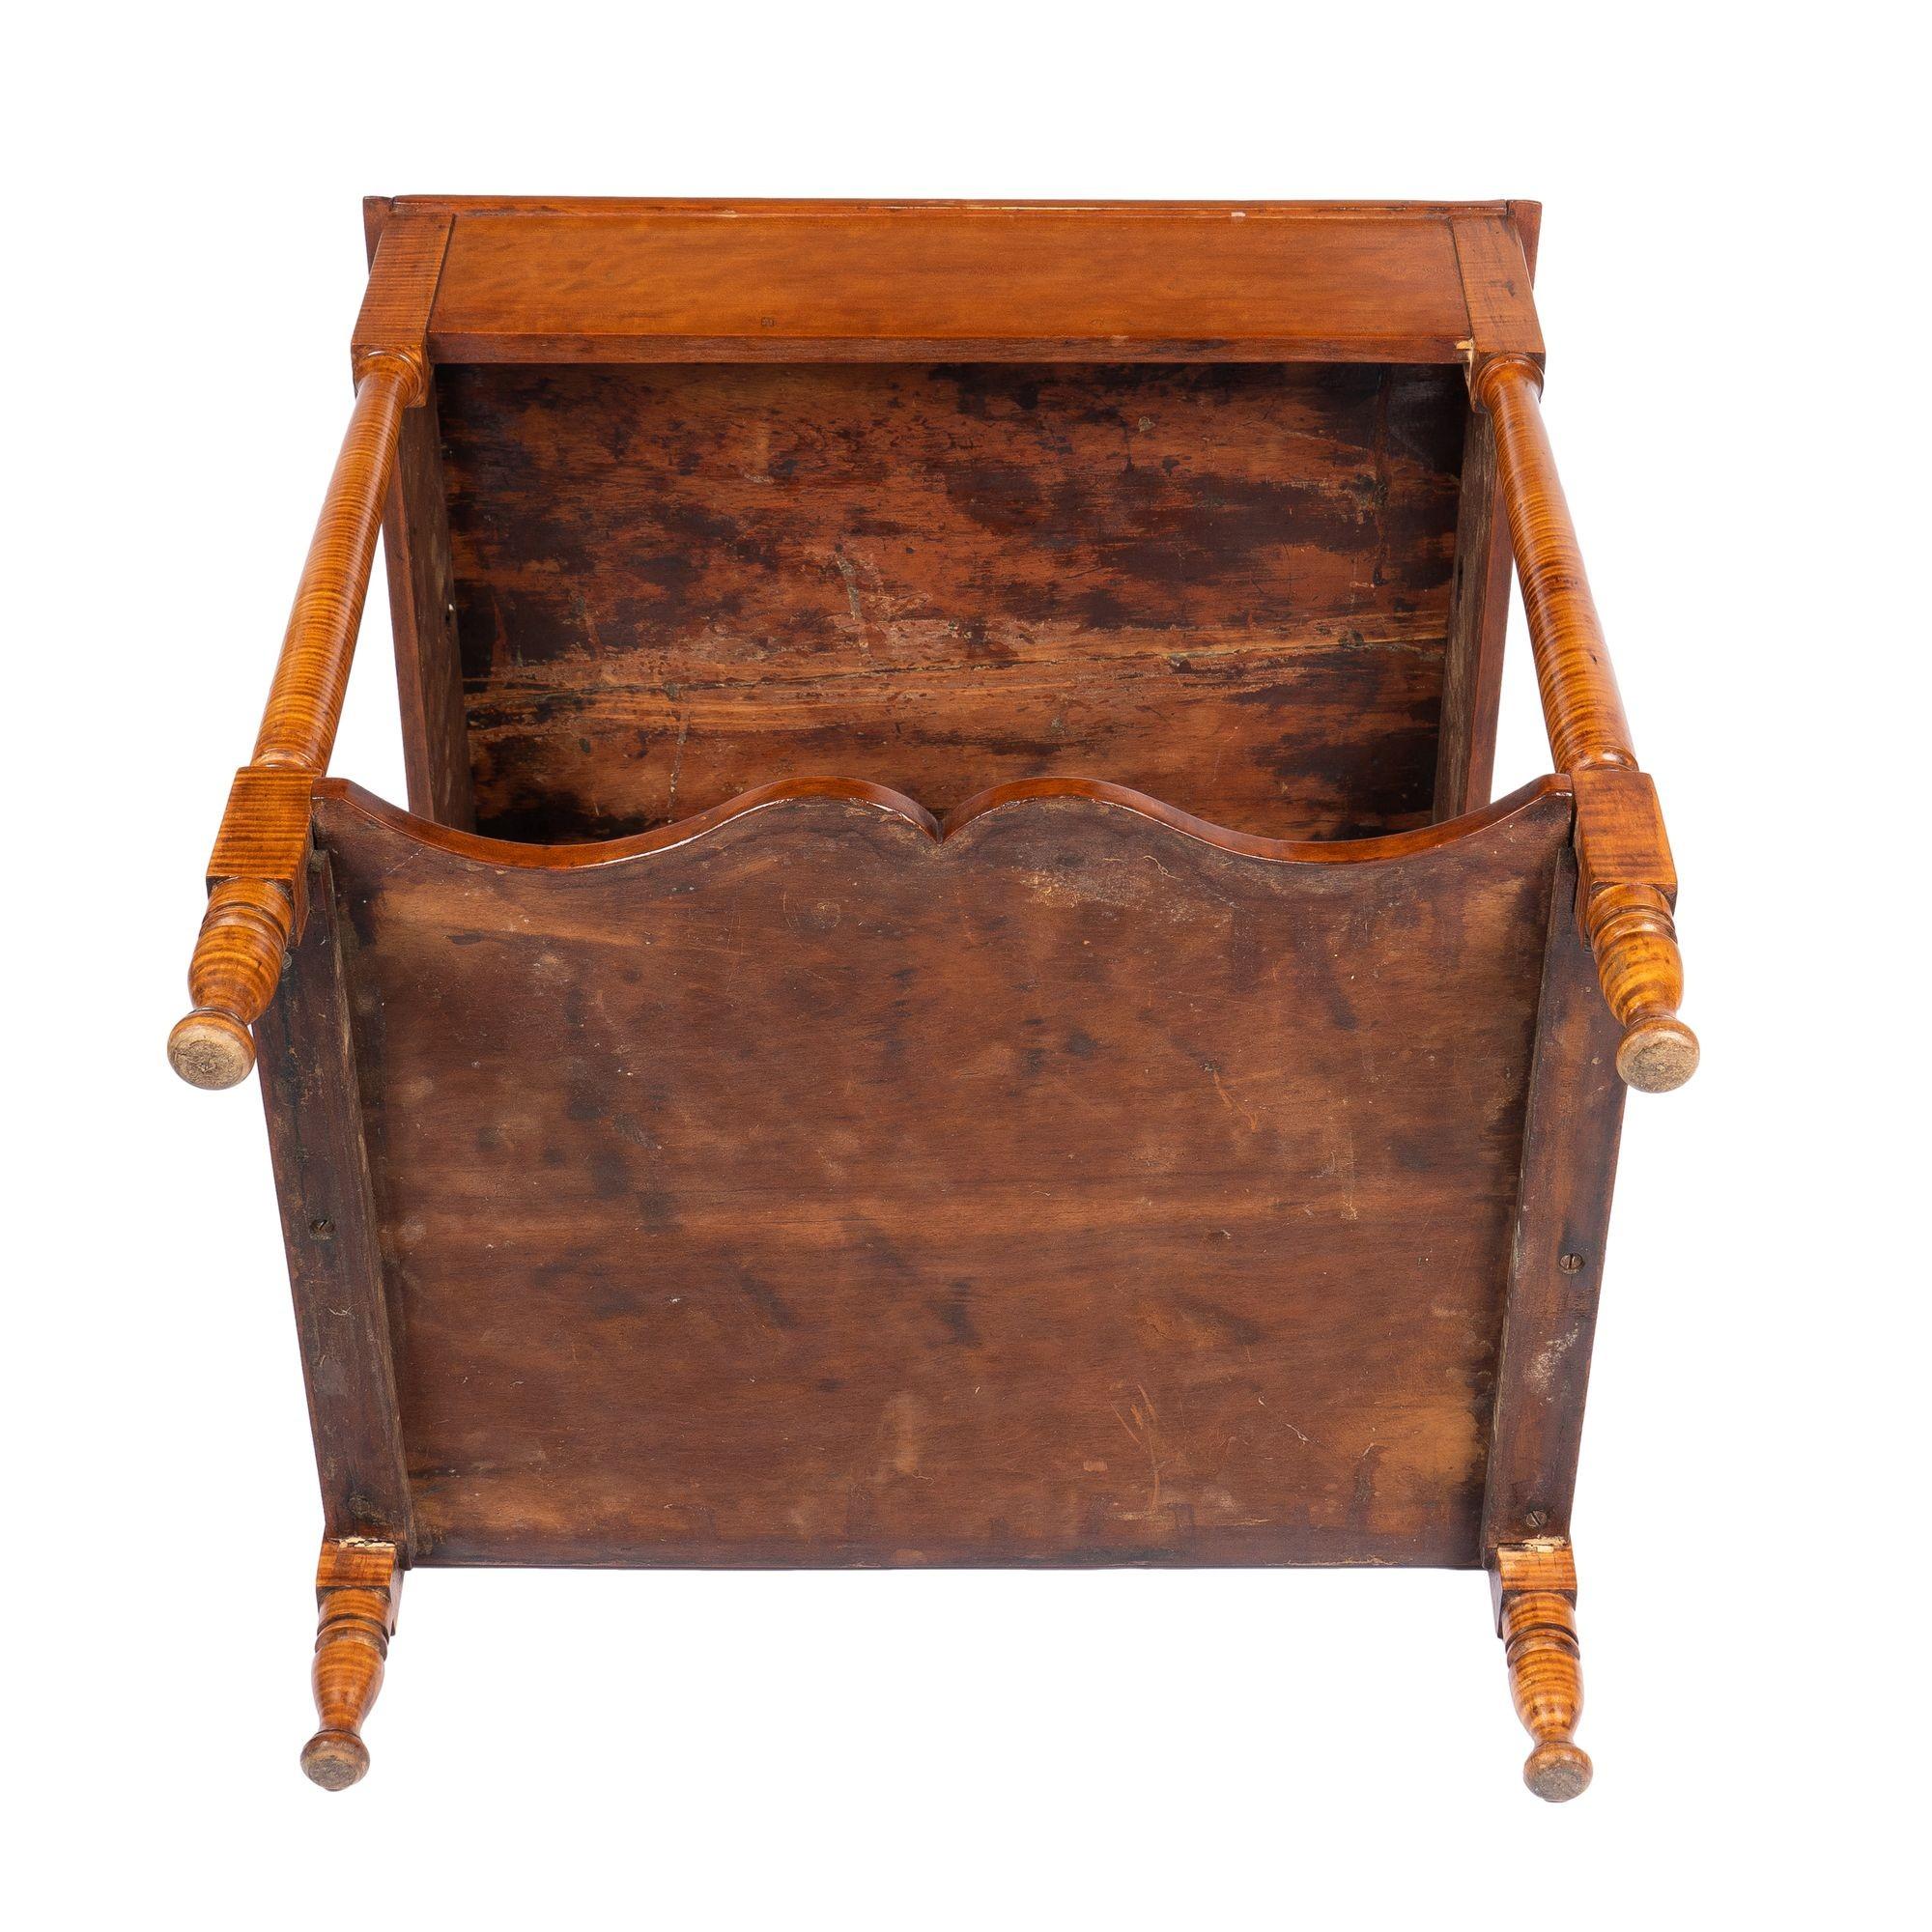 Philadelphia Cherry Wood Stand with Splash on a Conforming Apron, 1820 For Sale 6